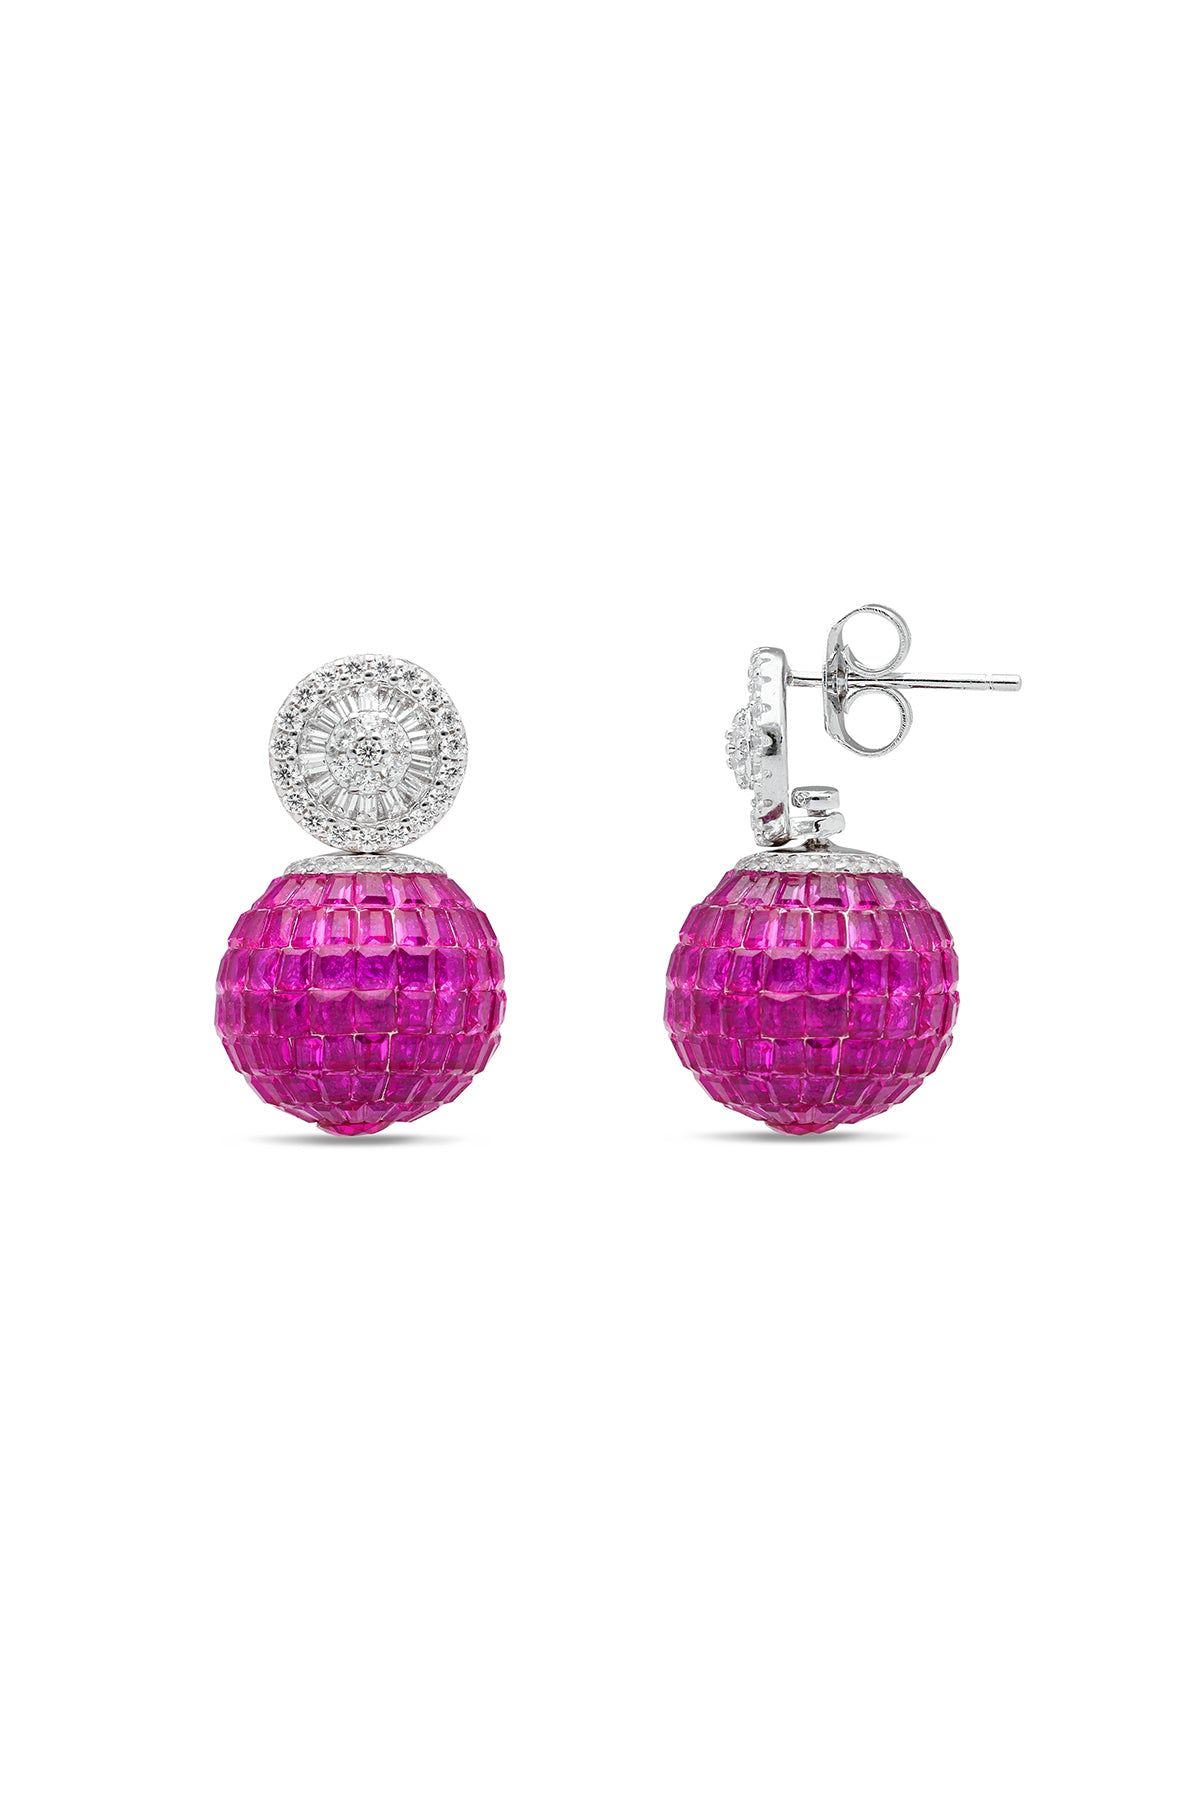 The Whimsy of the Bee Ruby Earrings